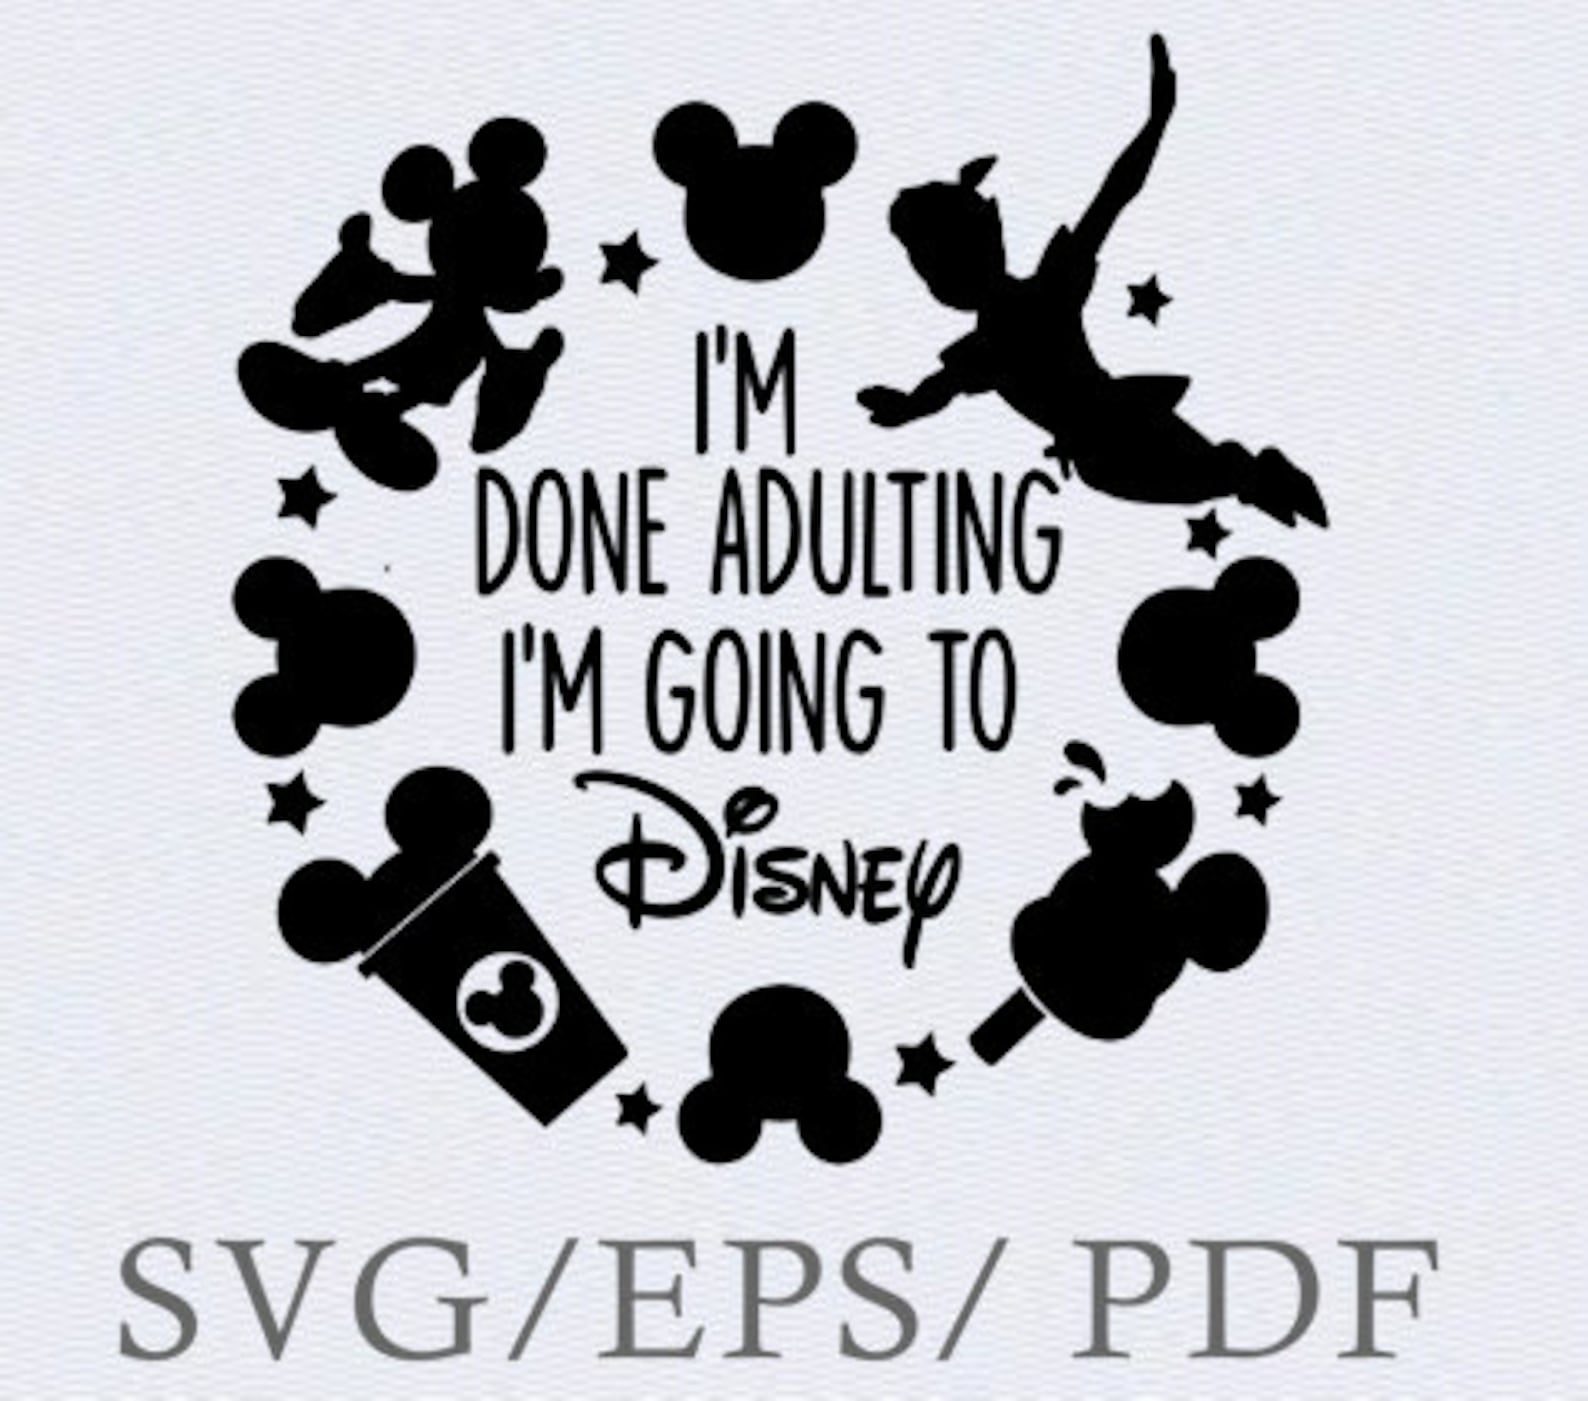 I'm done adulting im going to Disney file Cricut SVG decal | Etsy